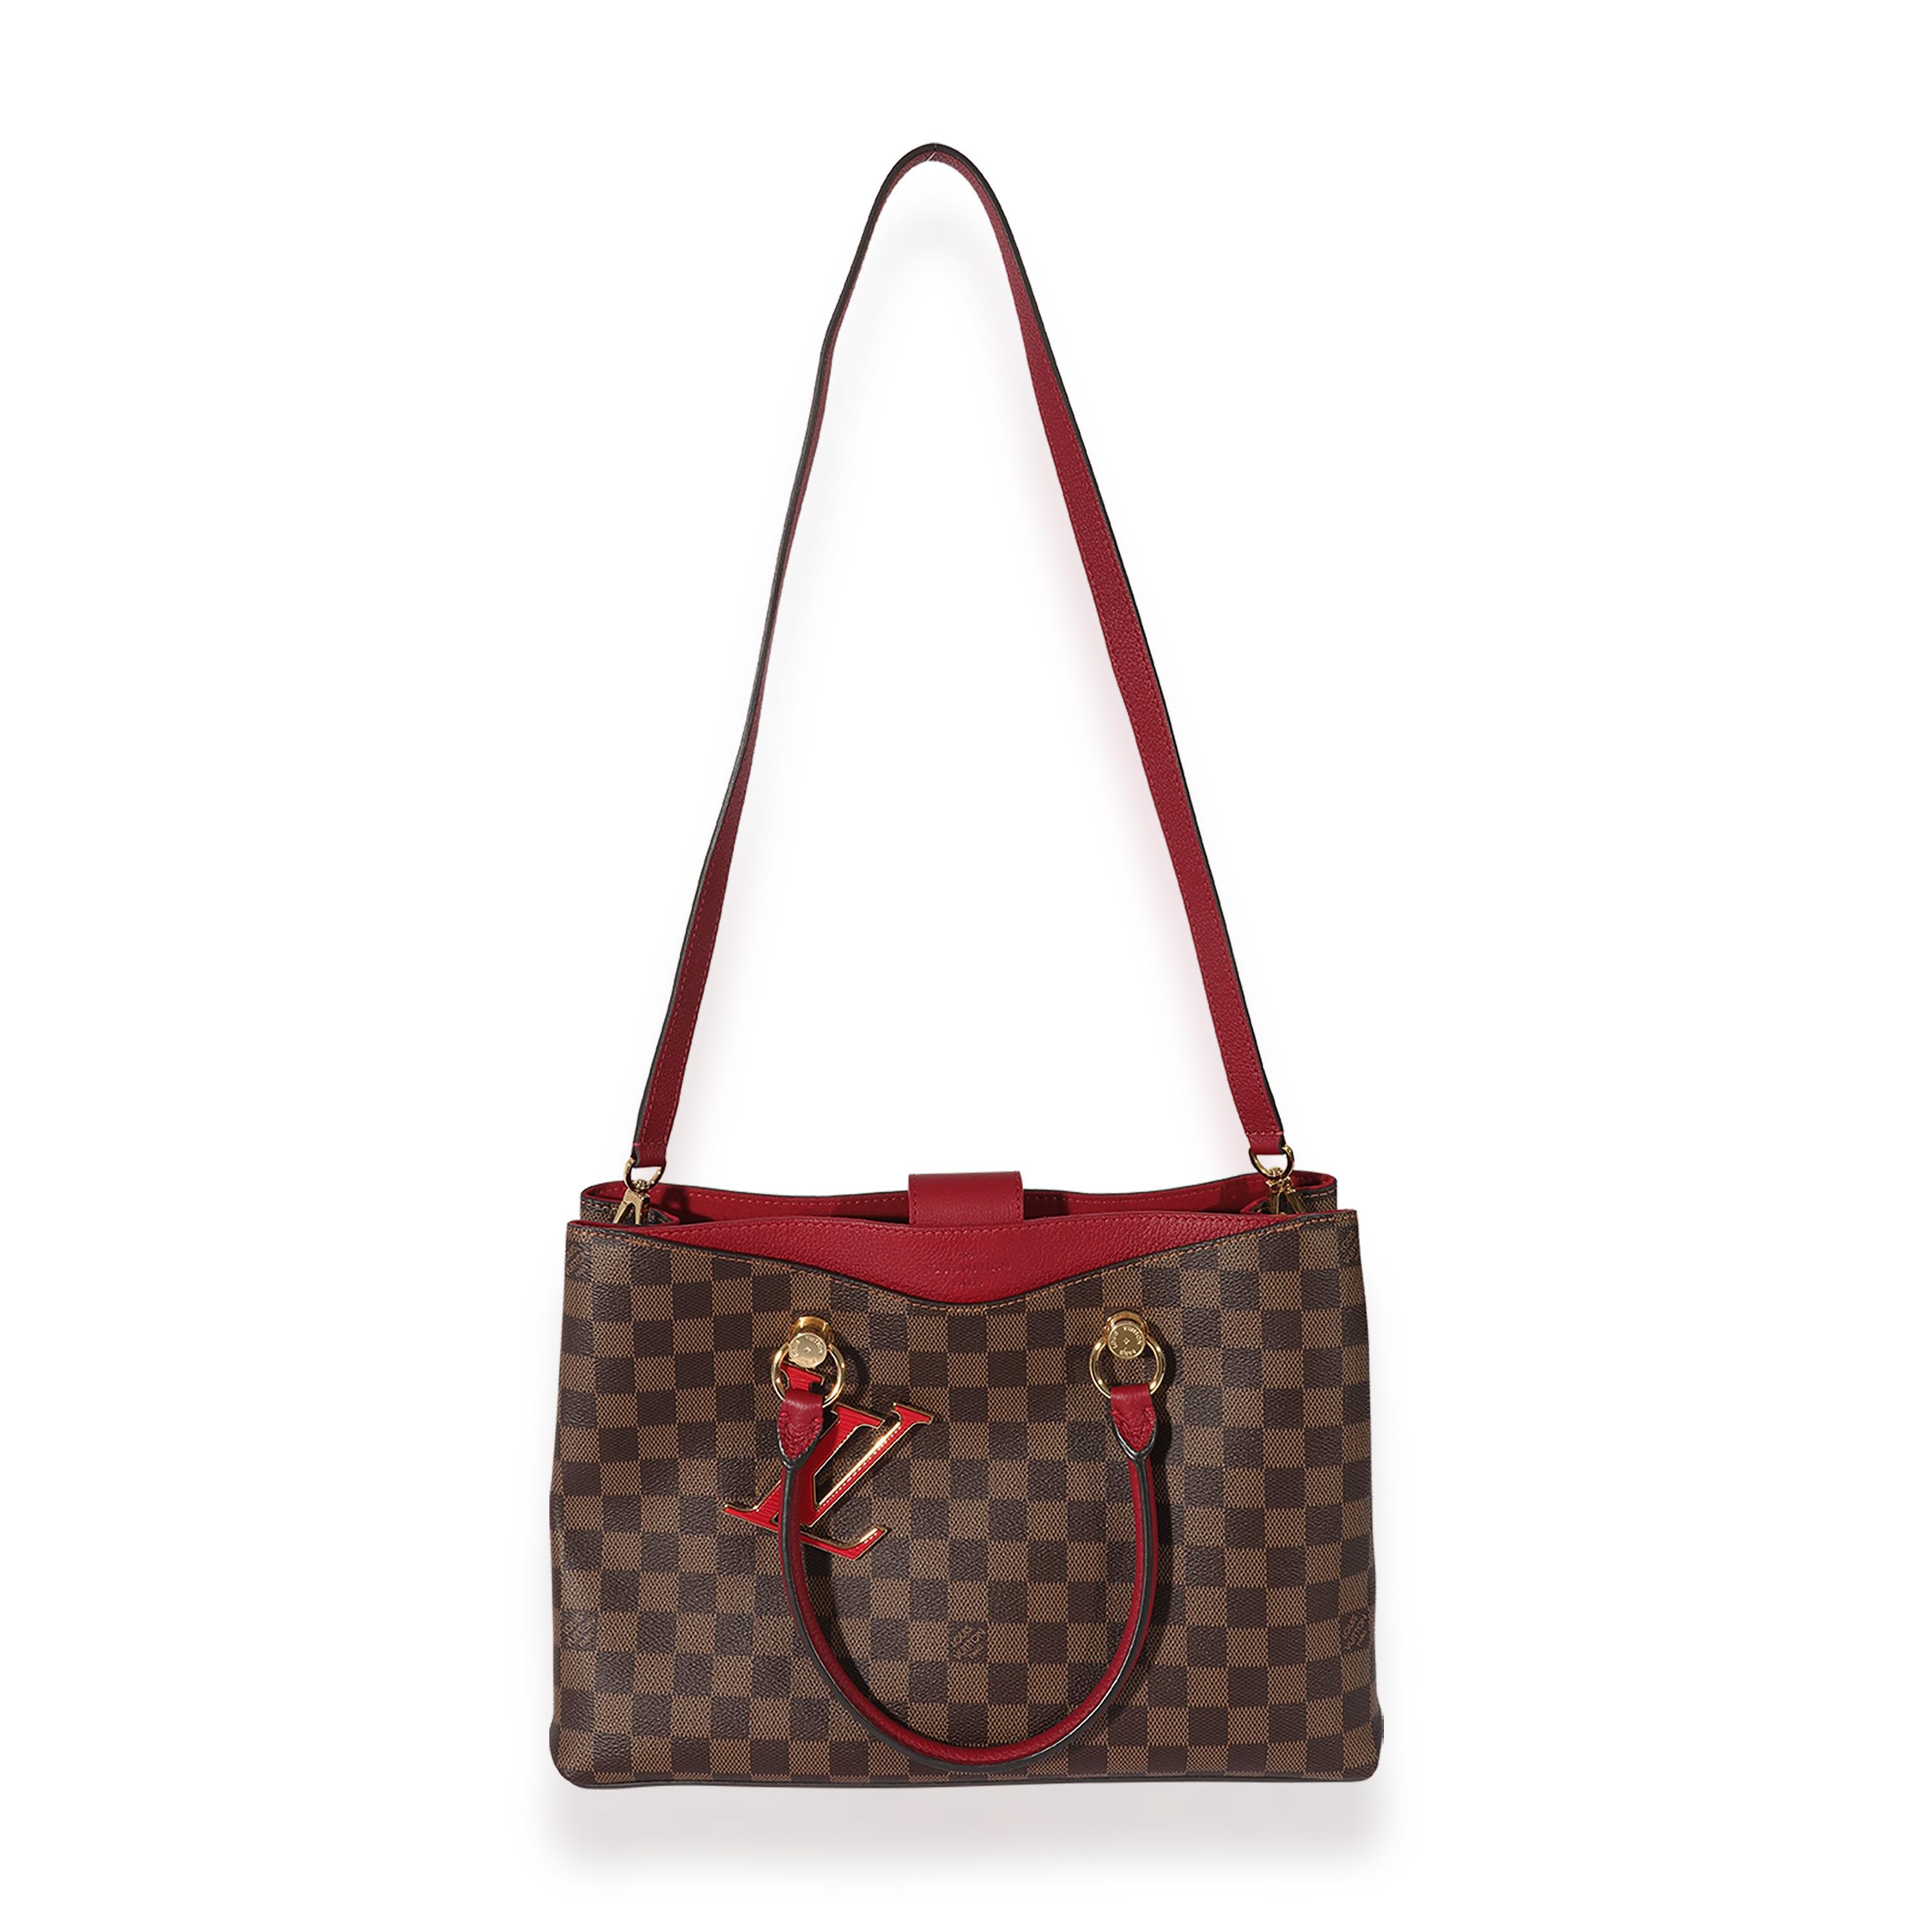 Listing Title: Damier Ebene LV Riverside Tote
SKU: 127596
Condition: Pre-owned 
Handbag Condition: Excellent
Condition Comments: Excellent Condition. Plastic at some hardware. Interior scuffing and light marks.
Brand: Louis Vuitton
Model: Damier